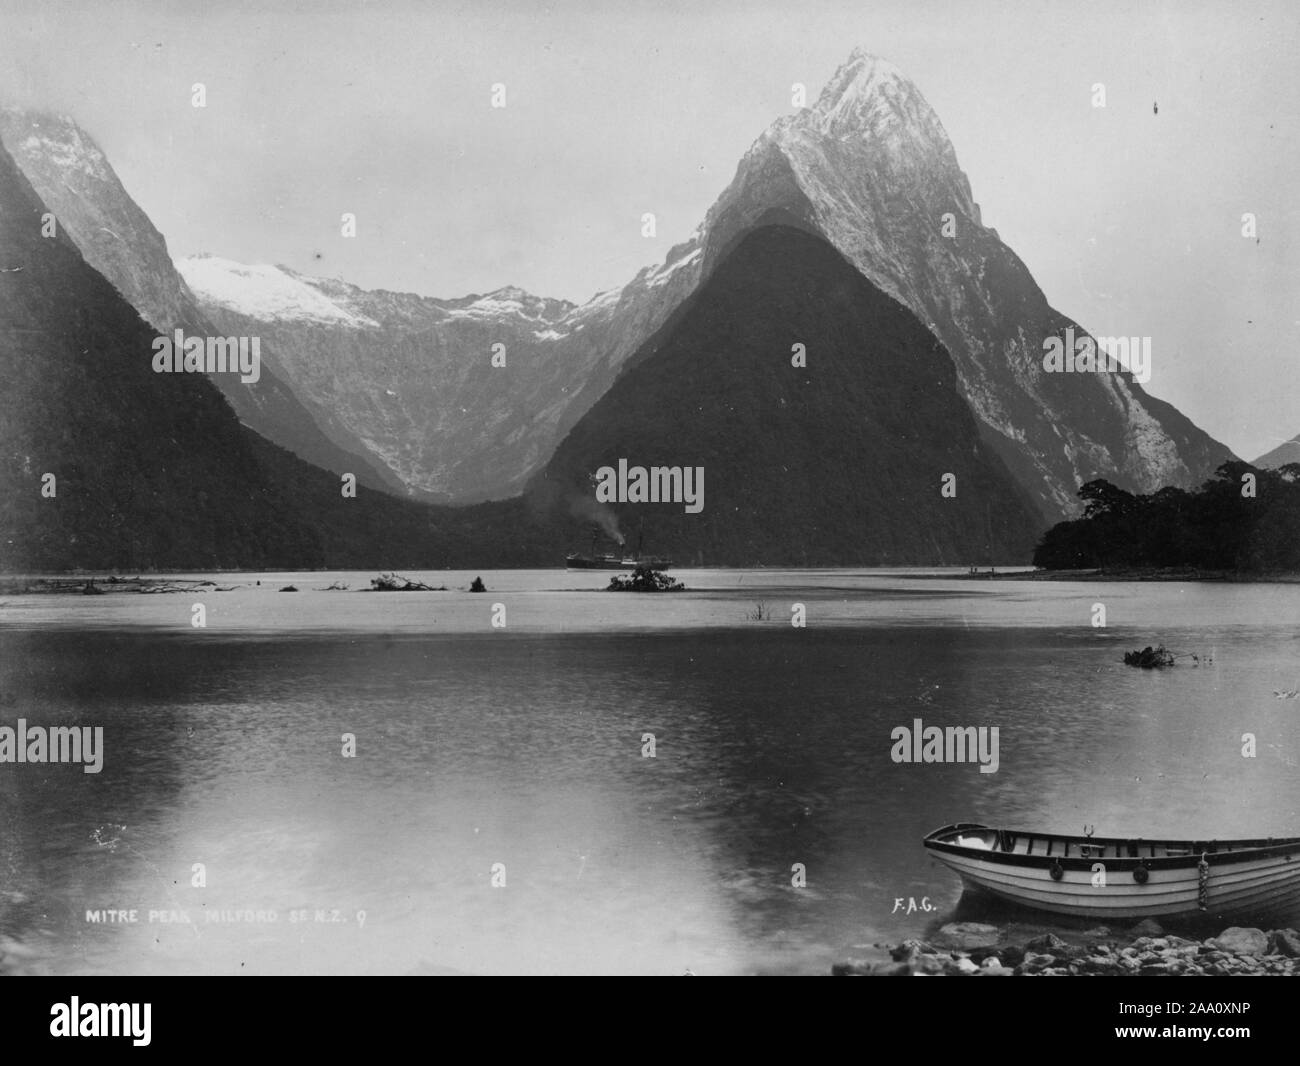 Black and white landscape photograph of the Mitre Peak Mountain and Milford Sound, one of the fjords that form the coast of Fiordland in the South Island, New Zealand, by photographer Frank Coxhead, 1885. From the New York Public Library. () Stock Photo